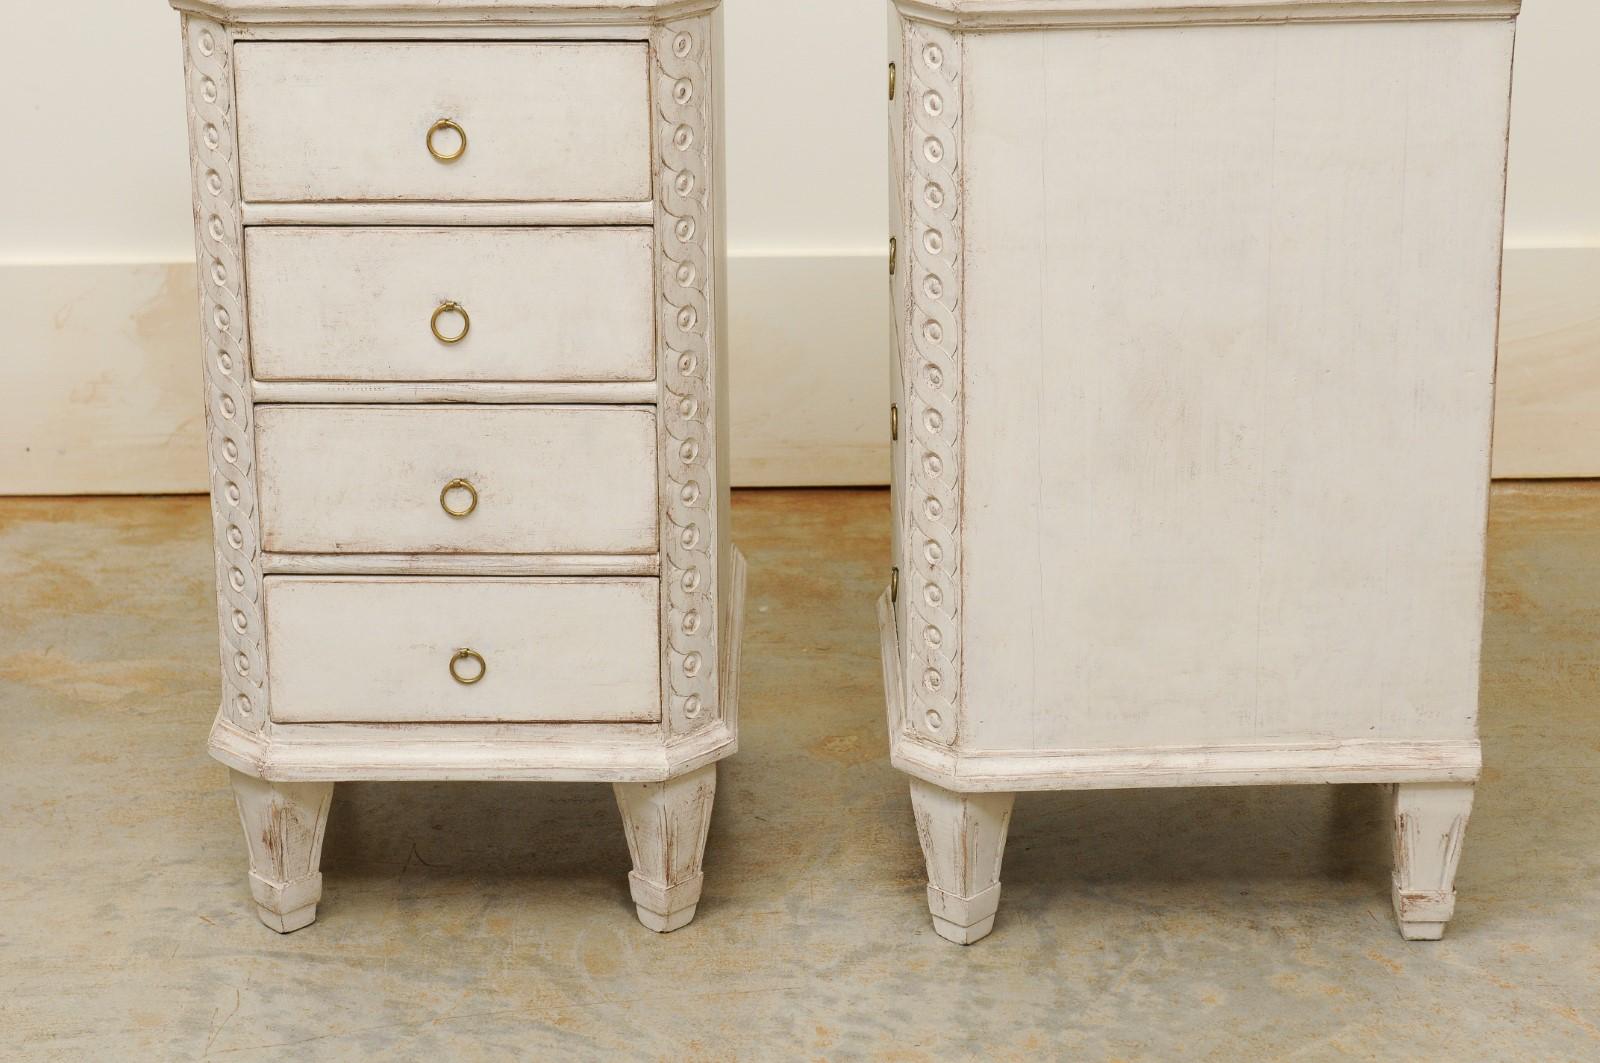 Pair of Swedish Neoclassical Style Painted Nightstand Tables with Guilloches 9